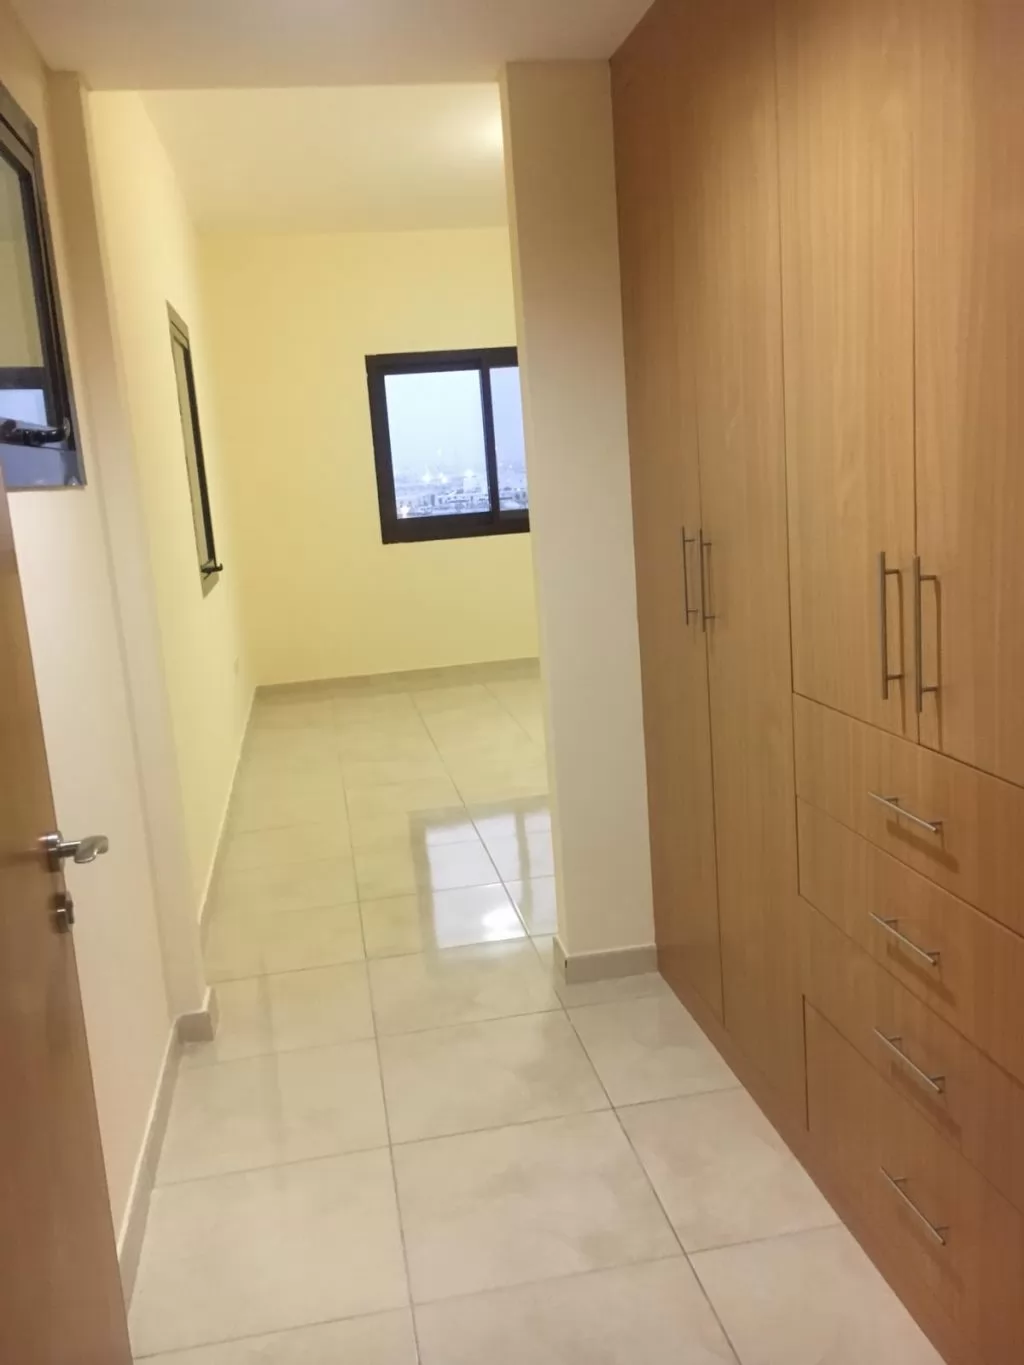 Residential Ready Property 1 Bedroom S/F Apartment  for sale in Lusail , Doha-Qatar #38773 - 3  image 